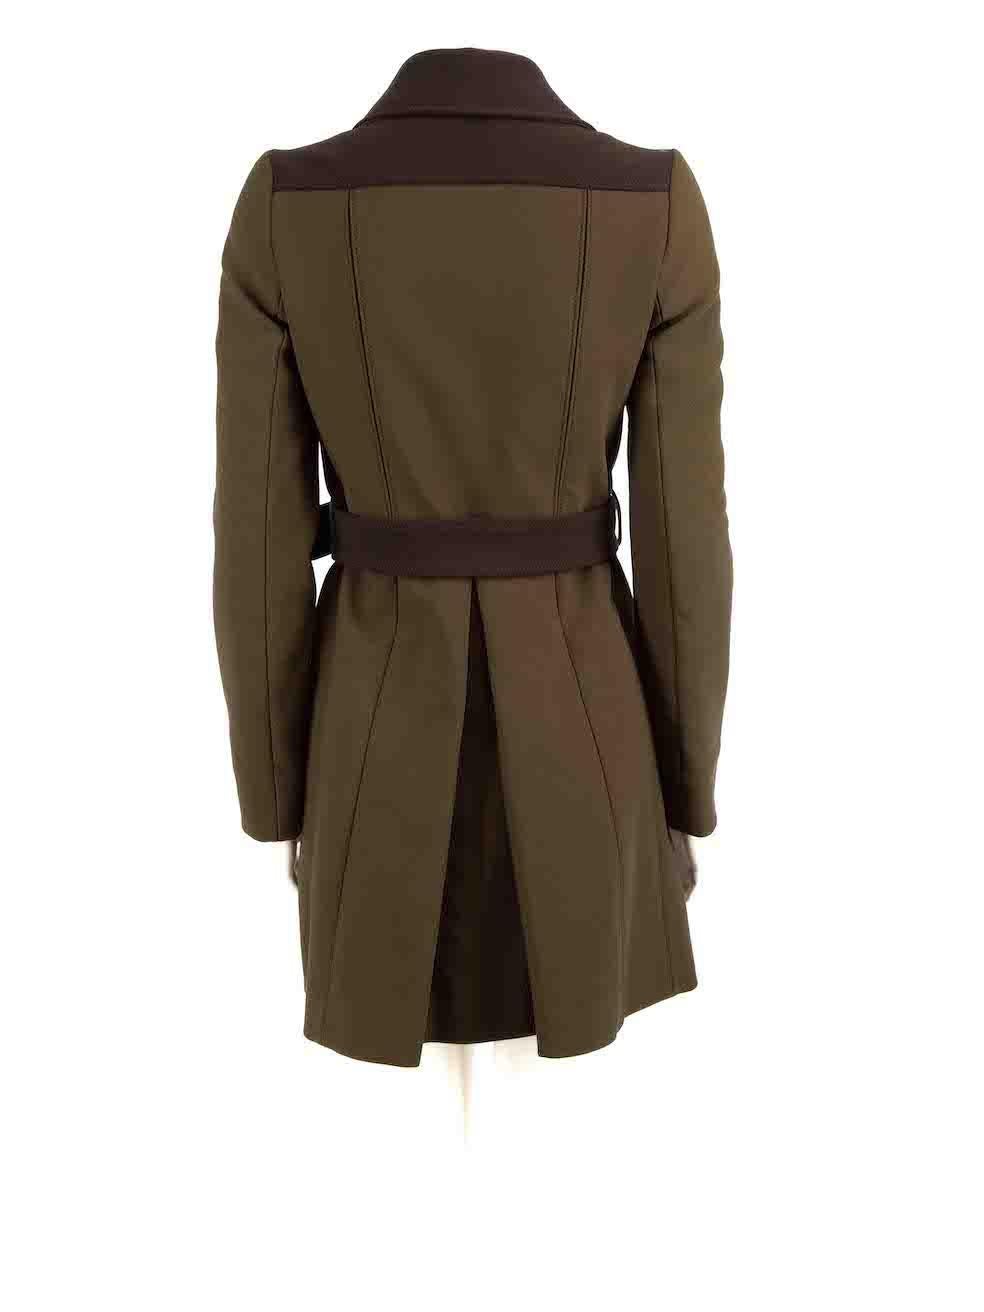 Prada Khaki Contrast Trench Coat Size S In Good Condition For Sale In London, GB